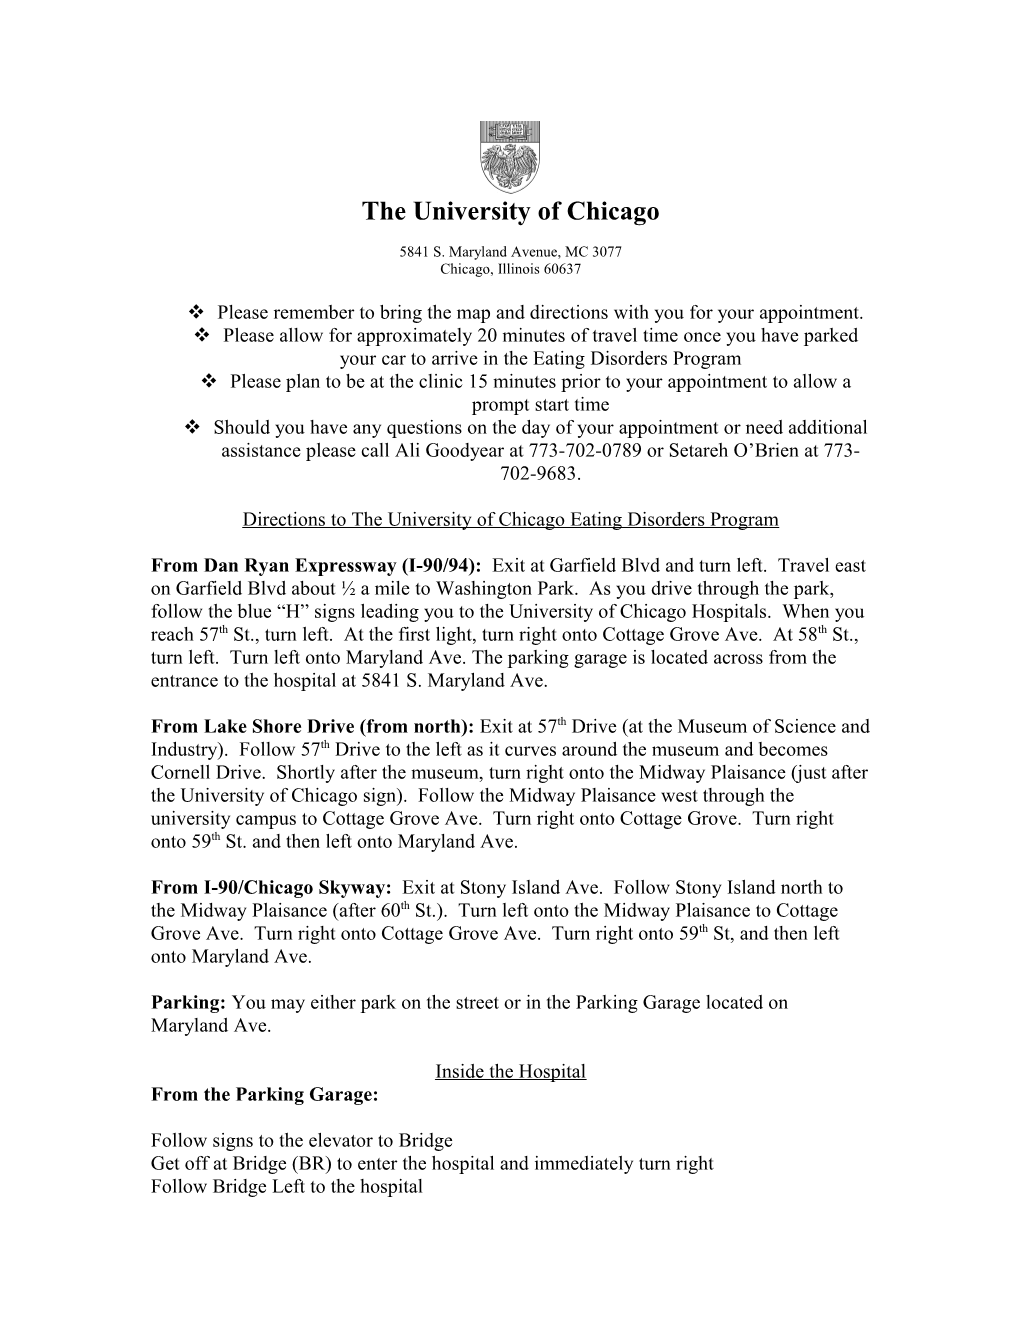 The University of Chicago s1